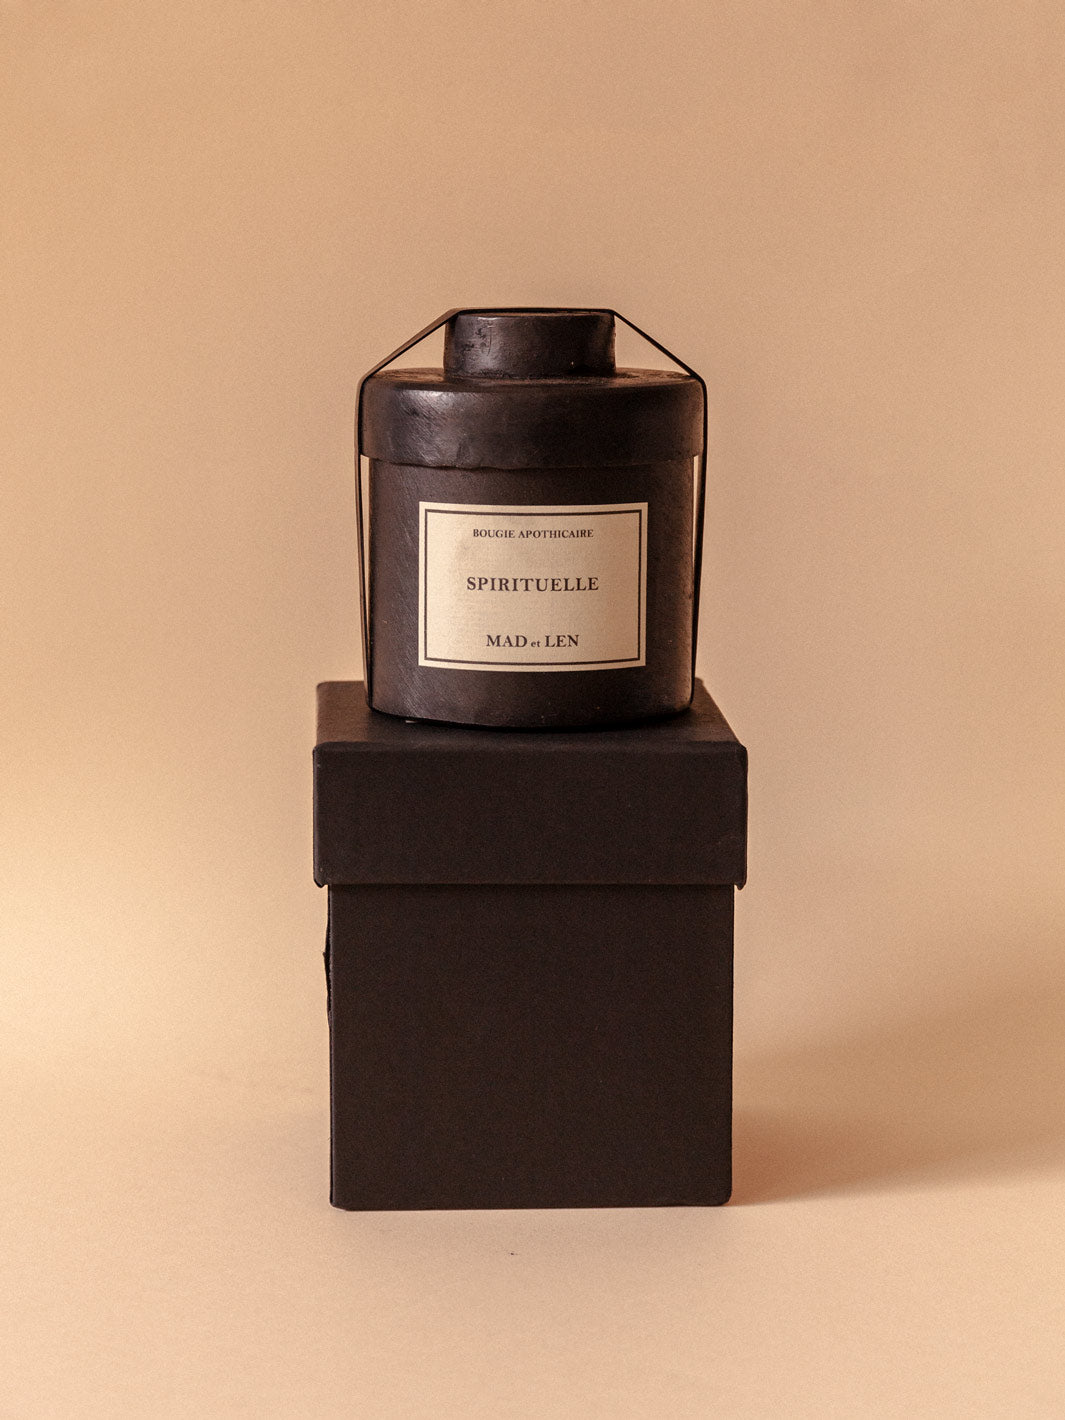 Spirituelle scented candle